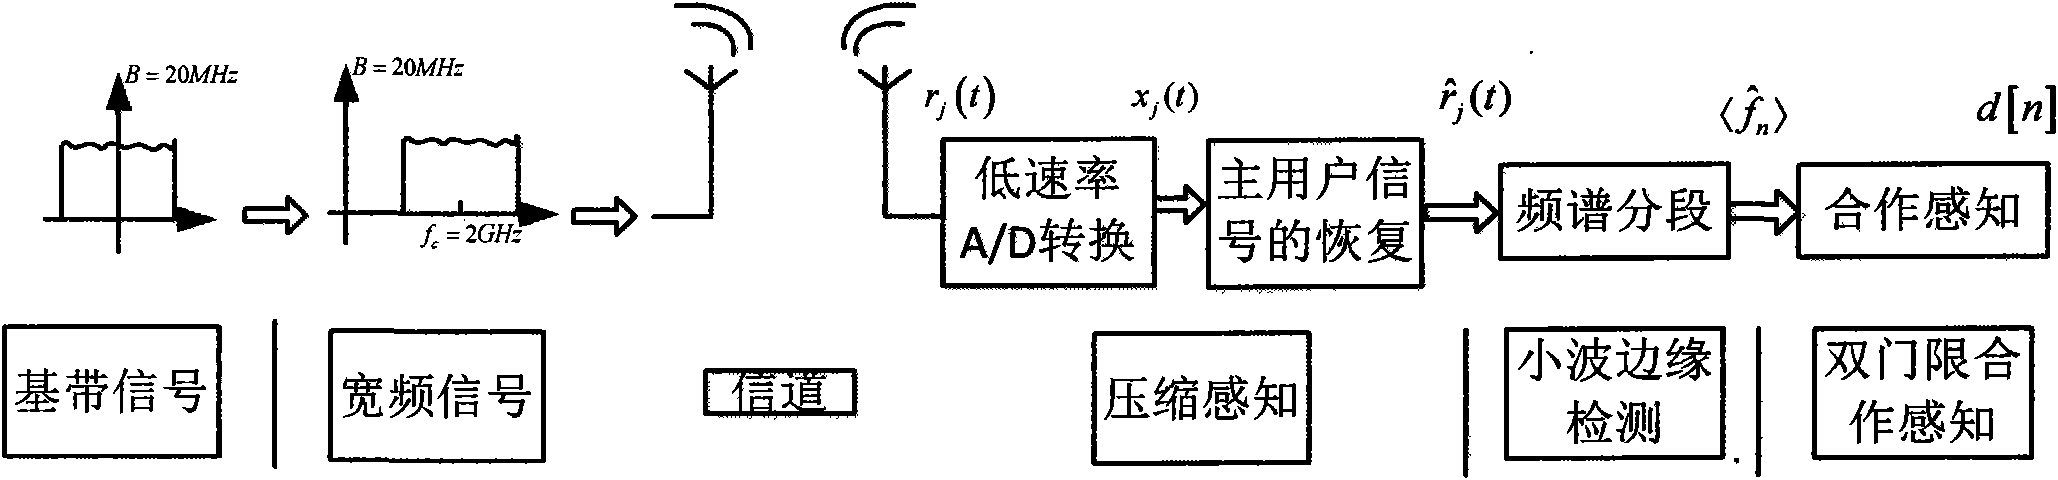 Double threshold cooperative sensing method in cognitive wireless network